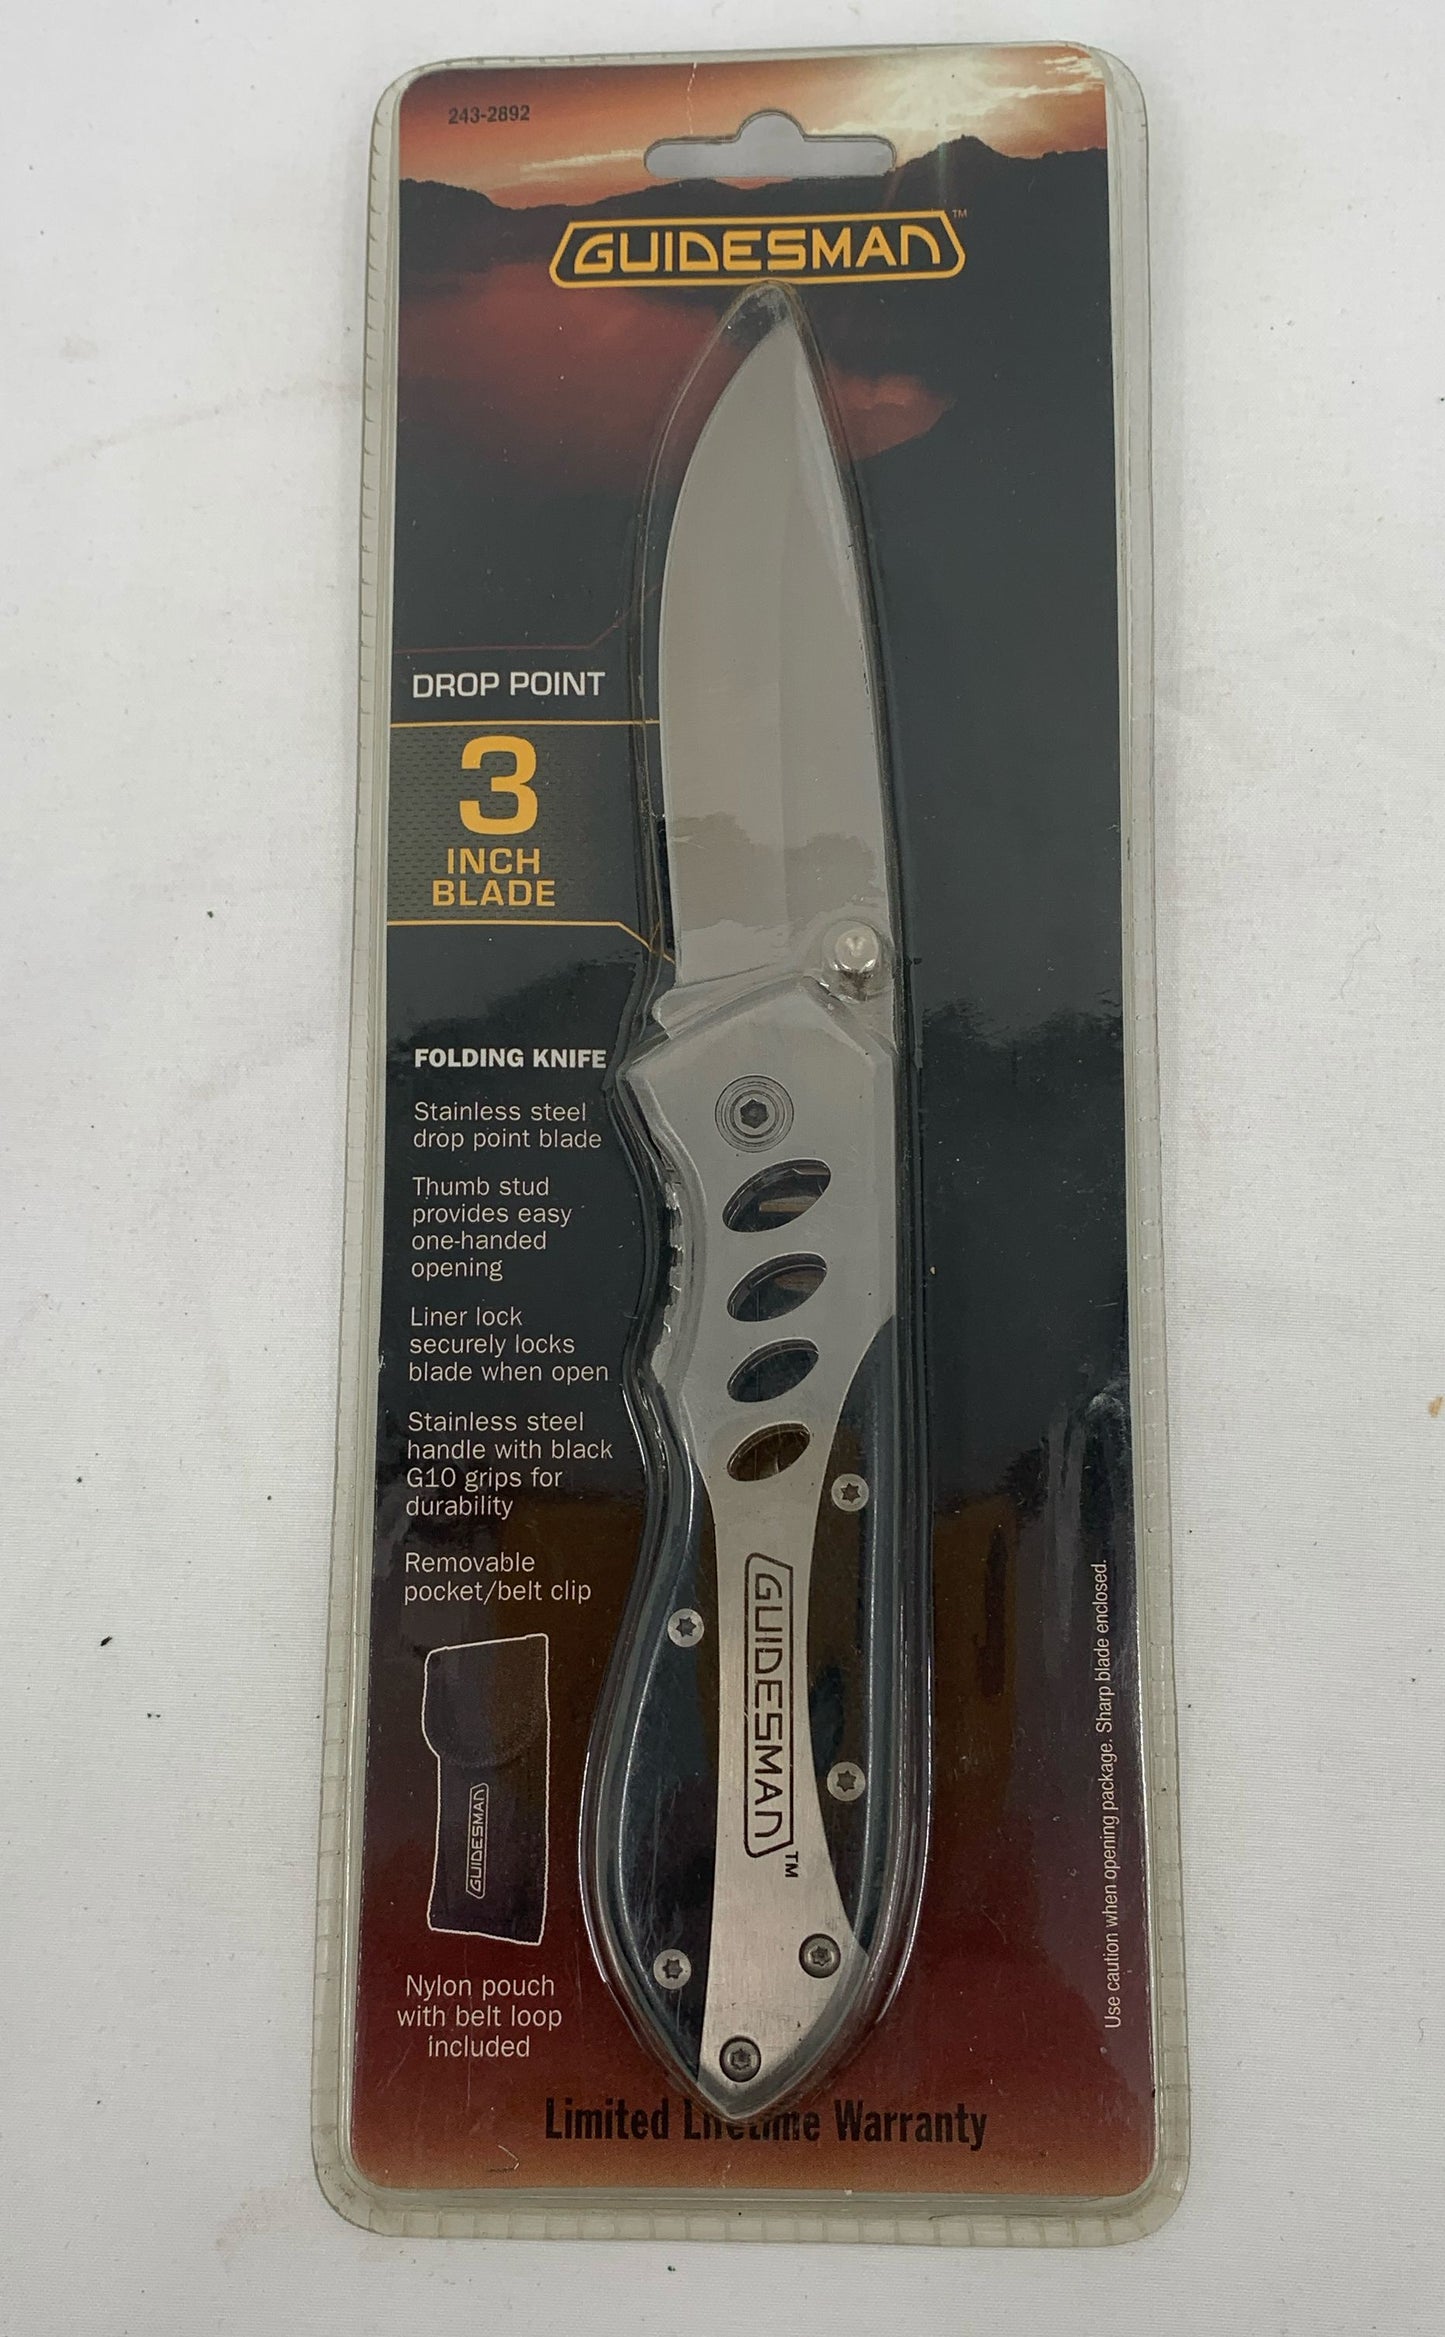 Guidesman Drop Point 3 In Folding Knife With Nylon Pouch Brand New In Package